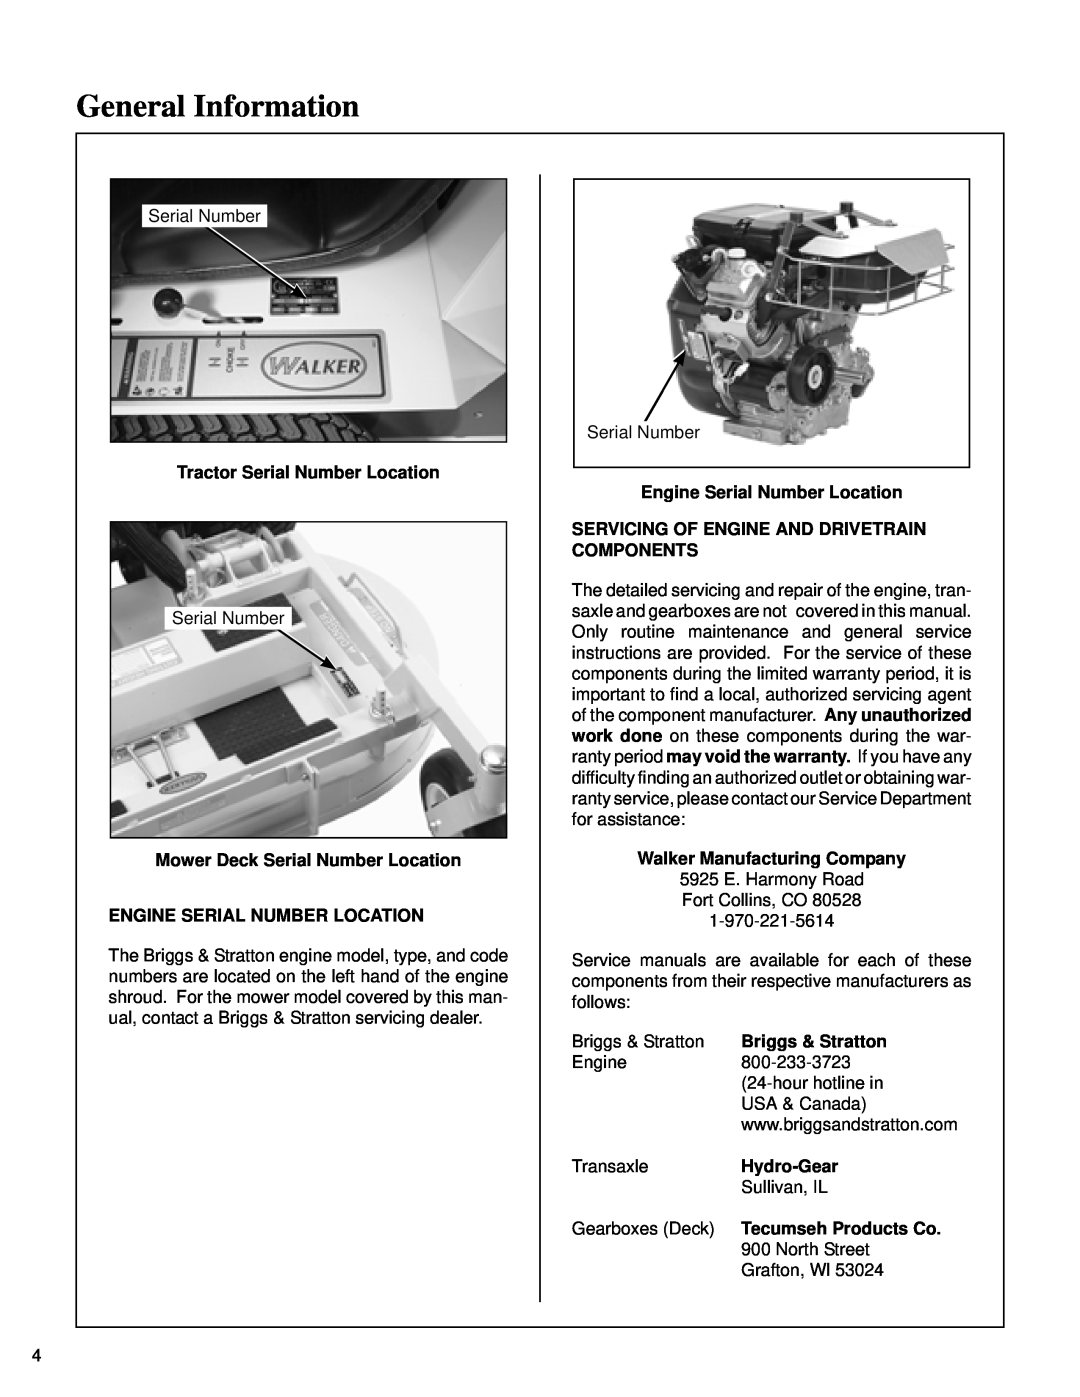 Briggs & Stratton MB (18 HP) General Information, Tractor Serial Number Location, Engine Serial Number Location 